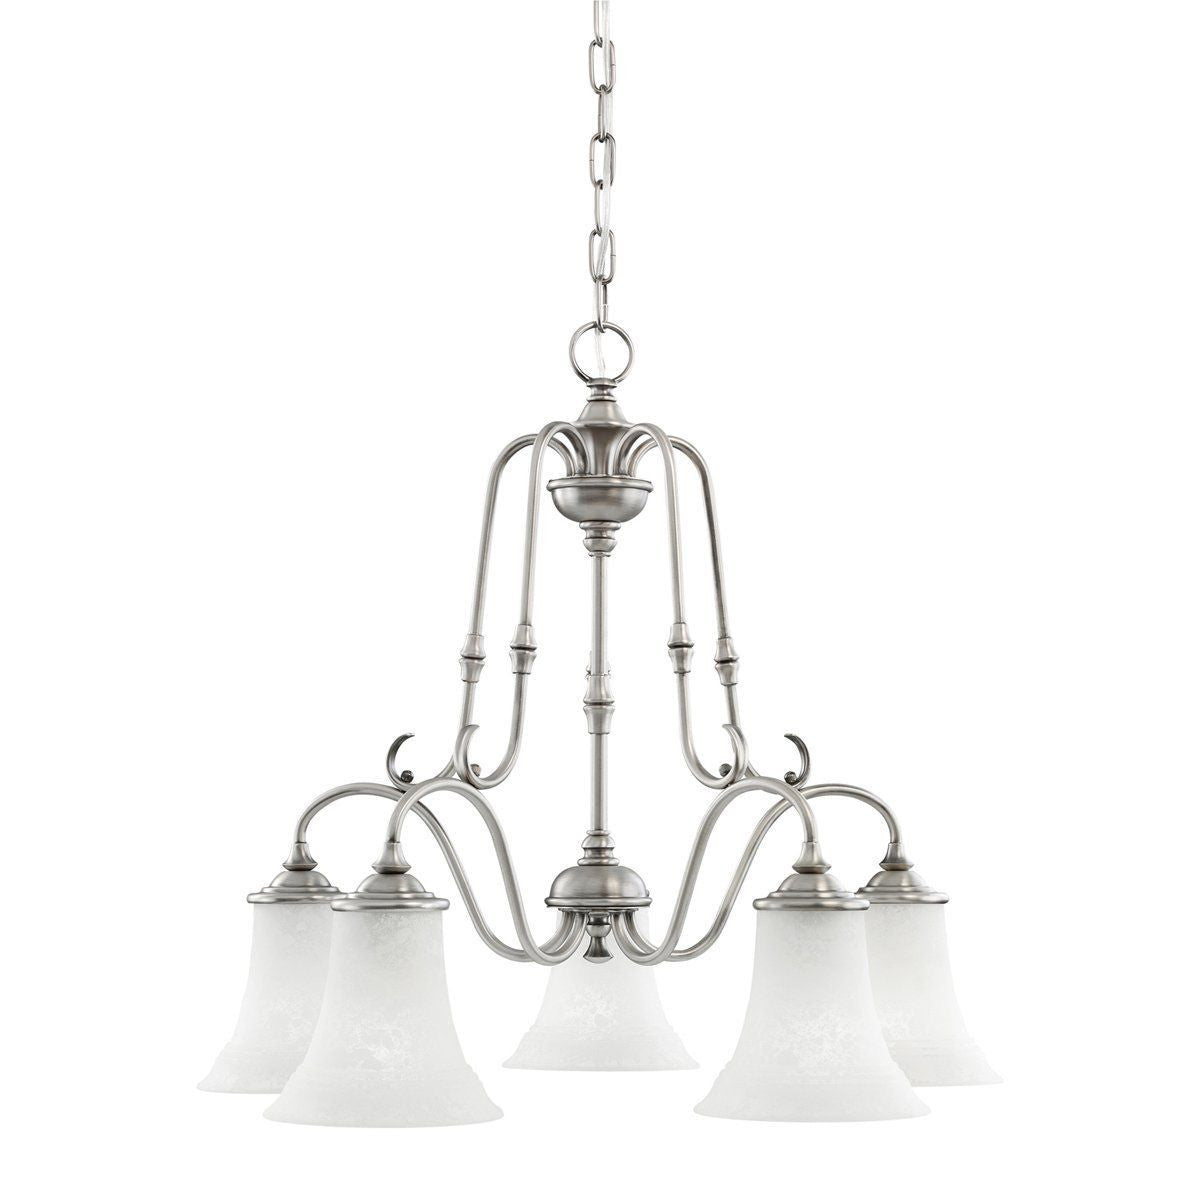 Aztec by Kichler Lighting 34917 Five Light Northampton Collection Hanging Chandelier in Antique Pewter Finish